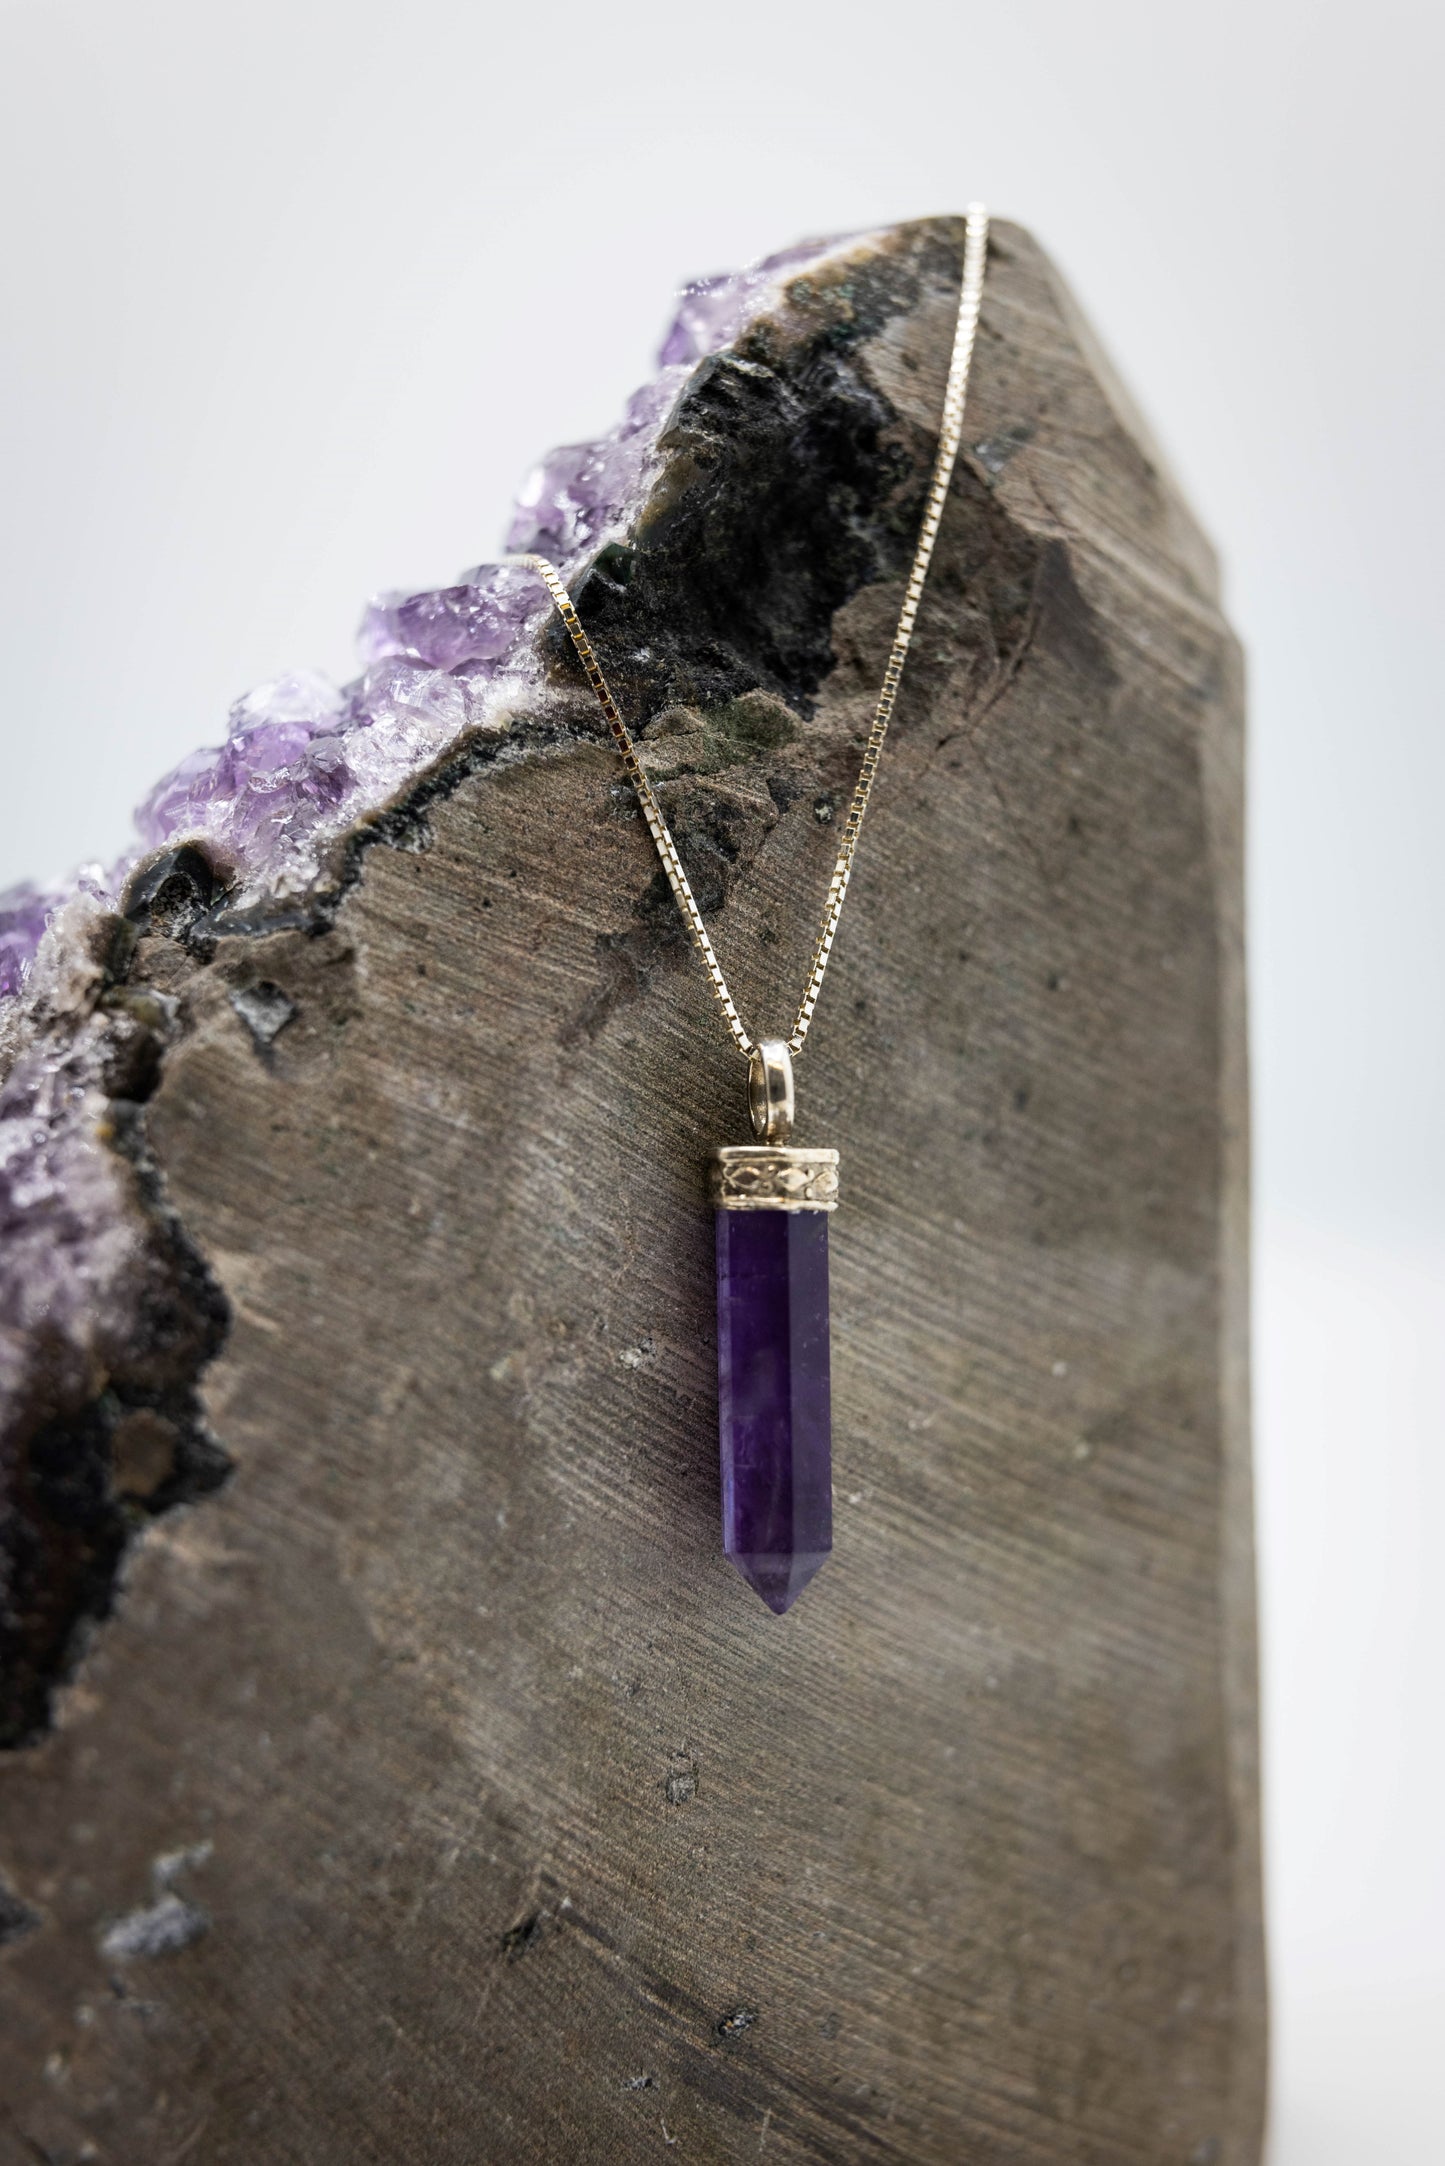 Amethyst Mini Crystal Point Necklaces .925 Adjustable Chain